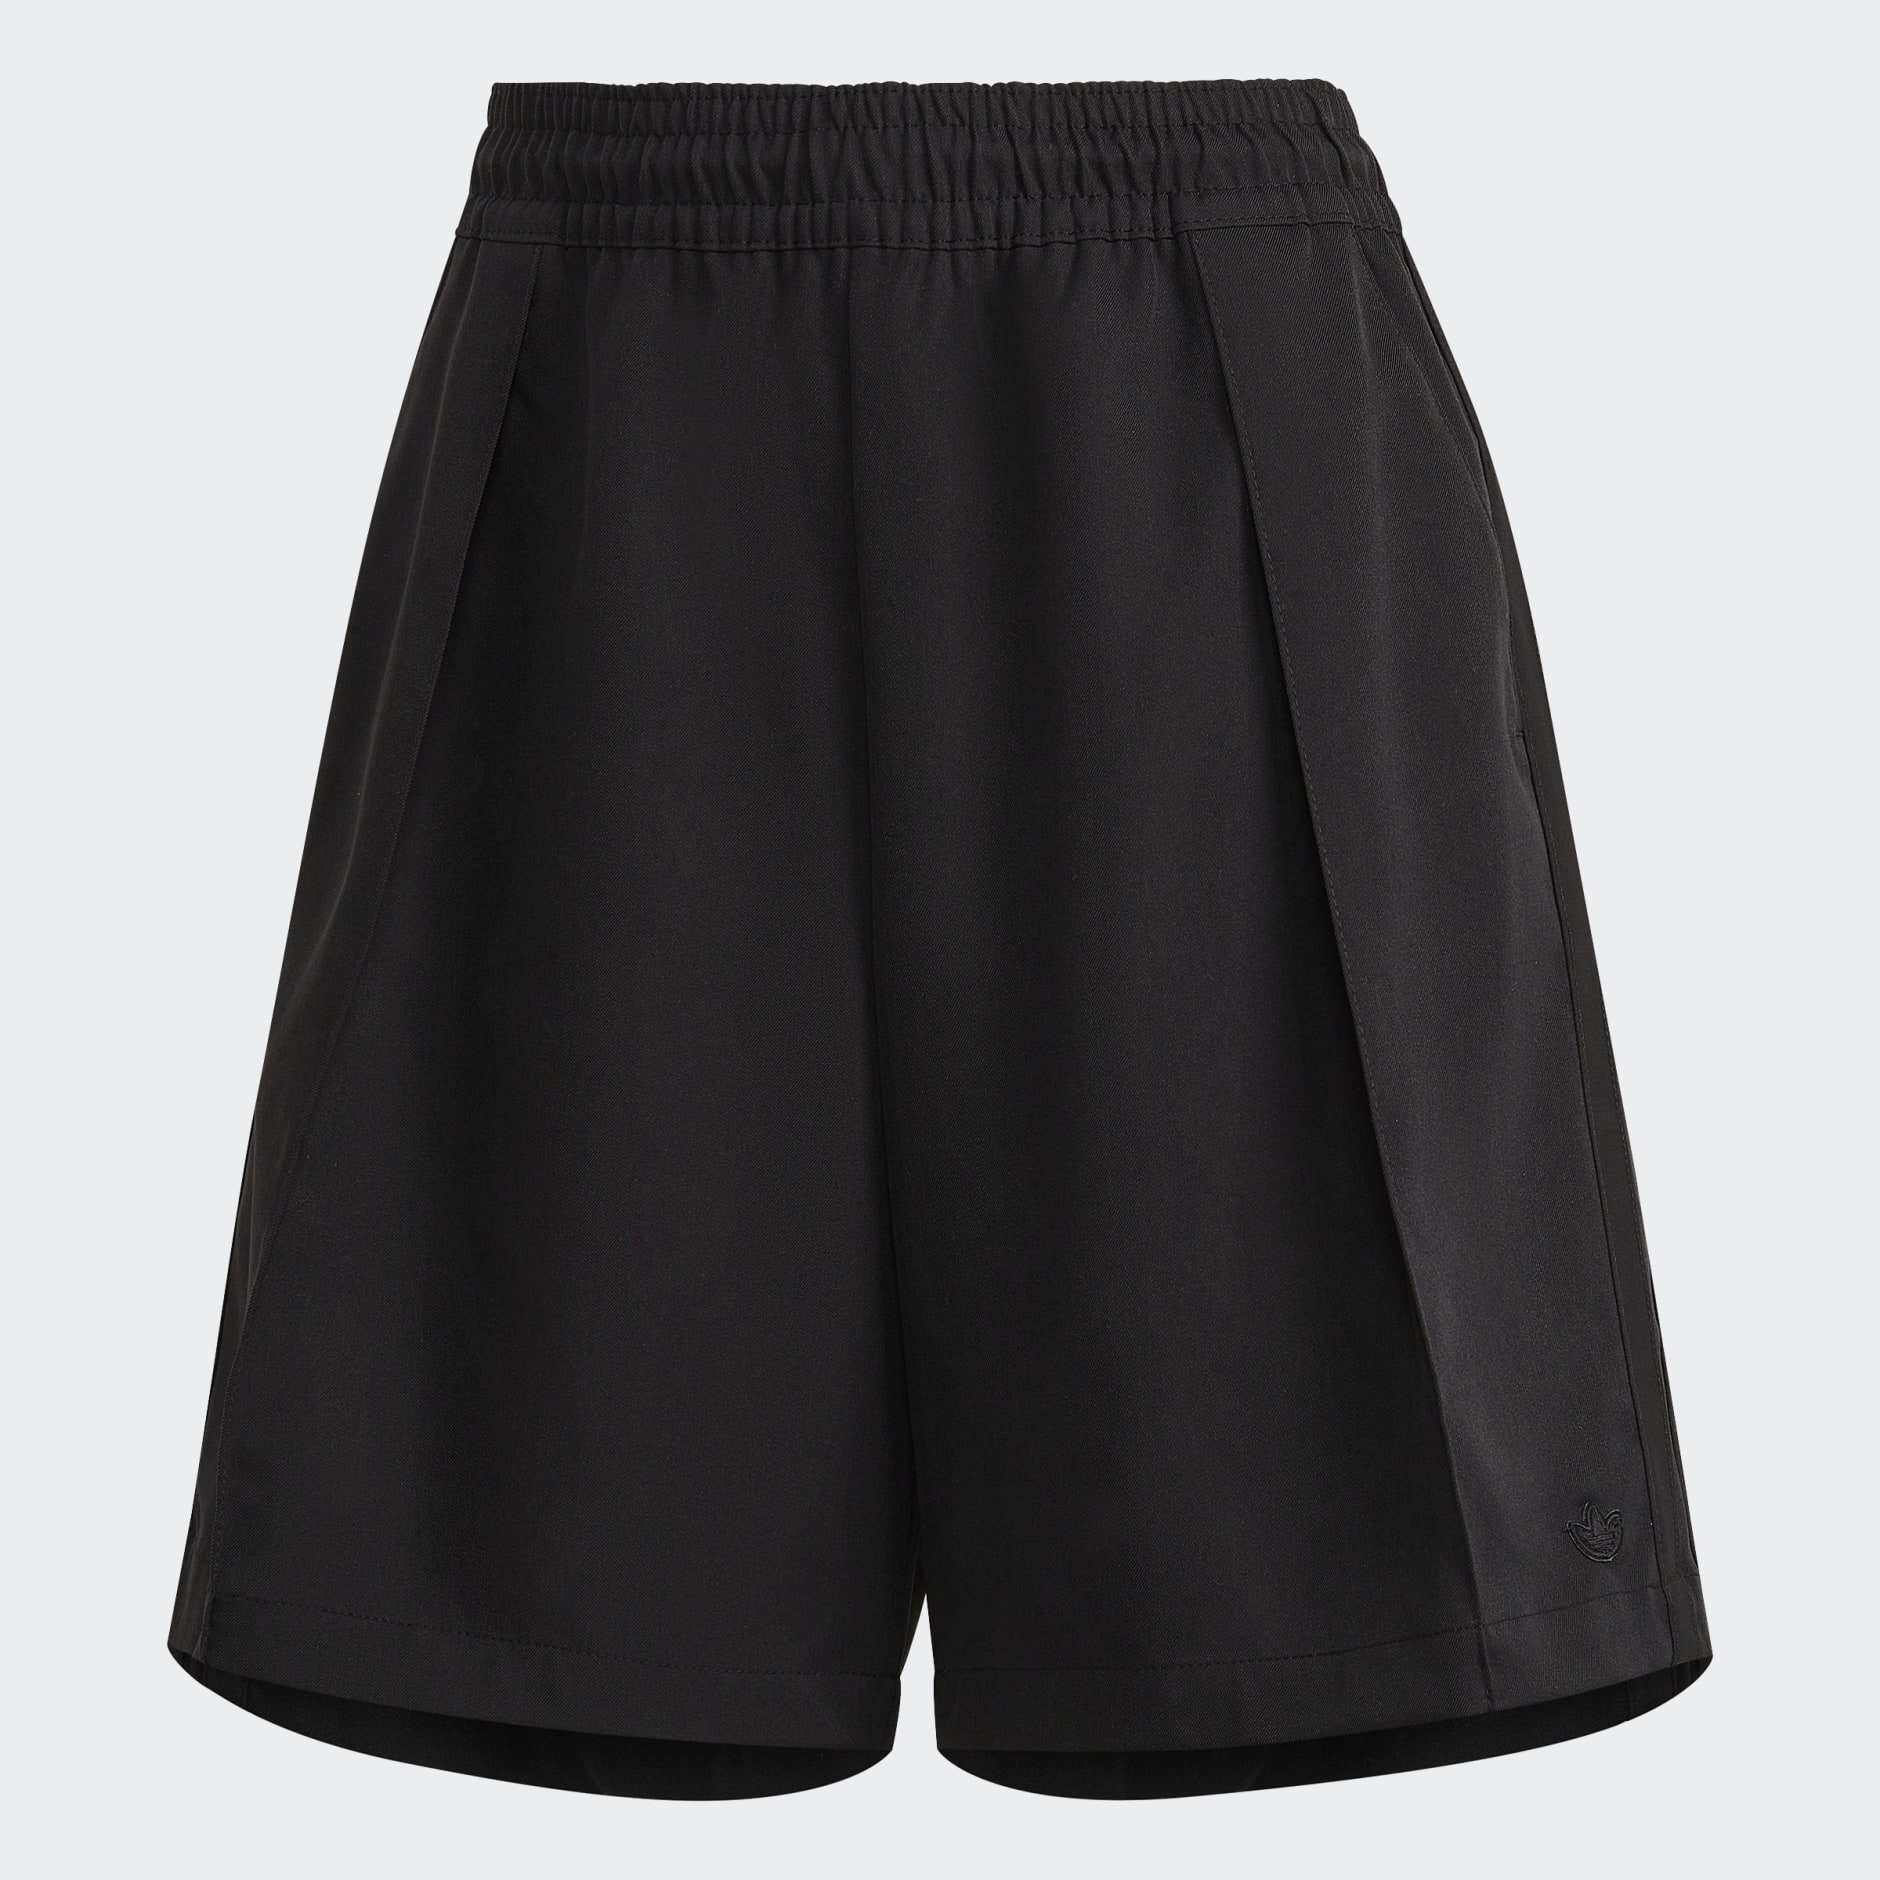 Clothing - Adicolor Contempo Tailored Shorts (Gender Neutral) - Black ...